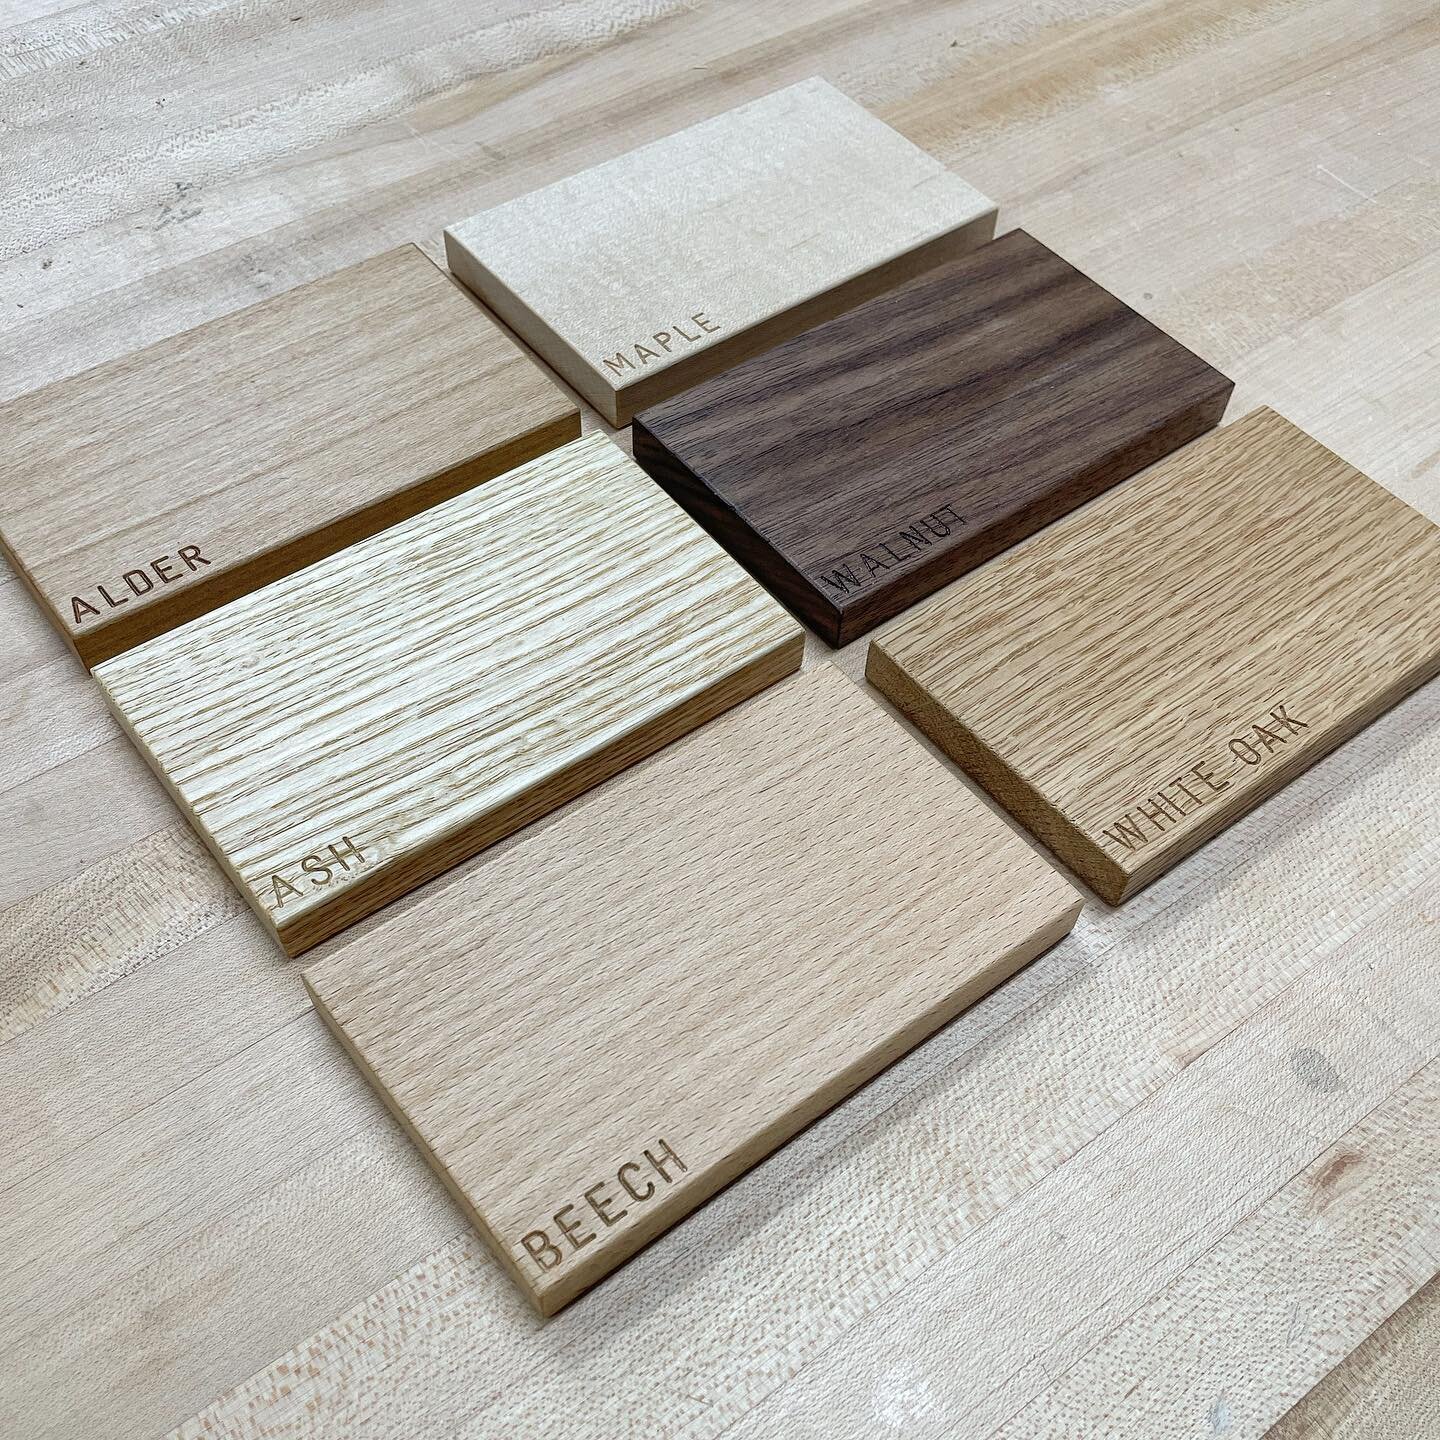 Decided to make use of remnants from past projects that I&rsquo;ve completed for clients and use them to update some quick wood sample swatches. I find these are really helpful for when I&rsquo;m instructing as well giving other clients a means to se